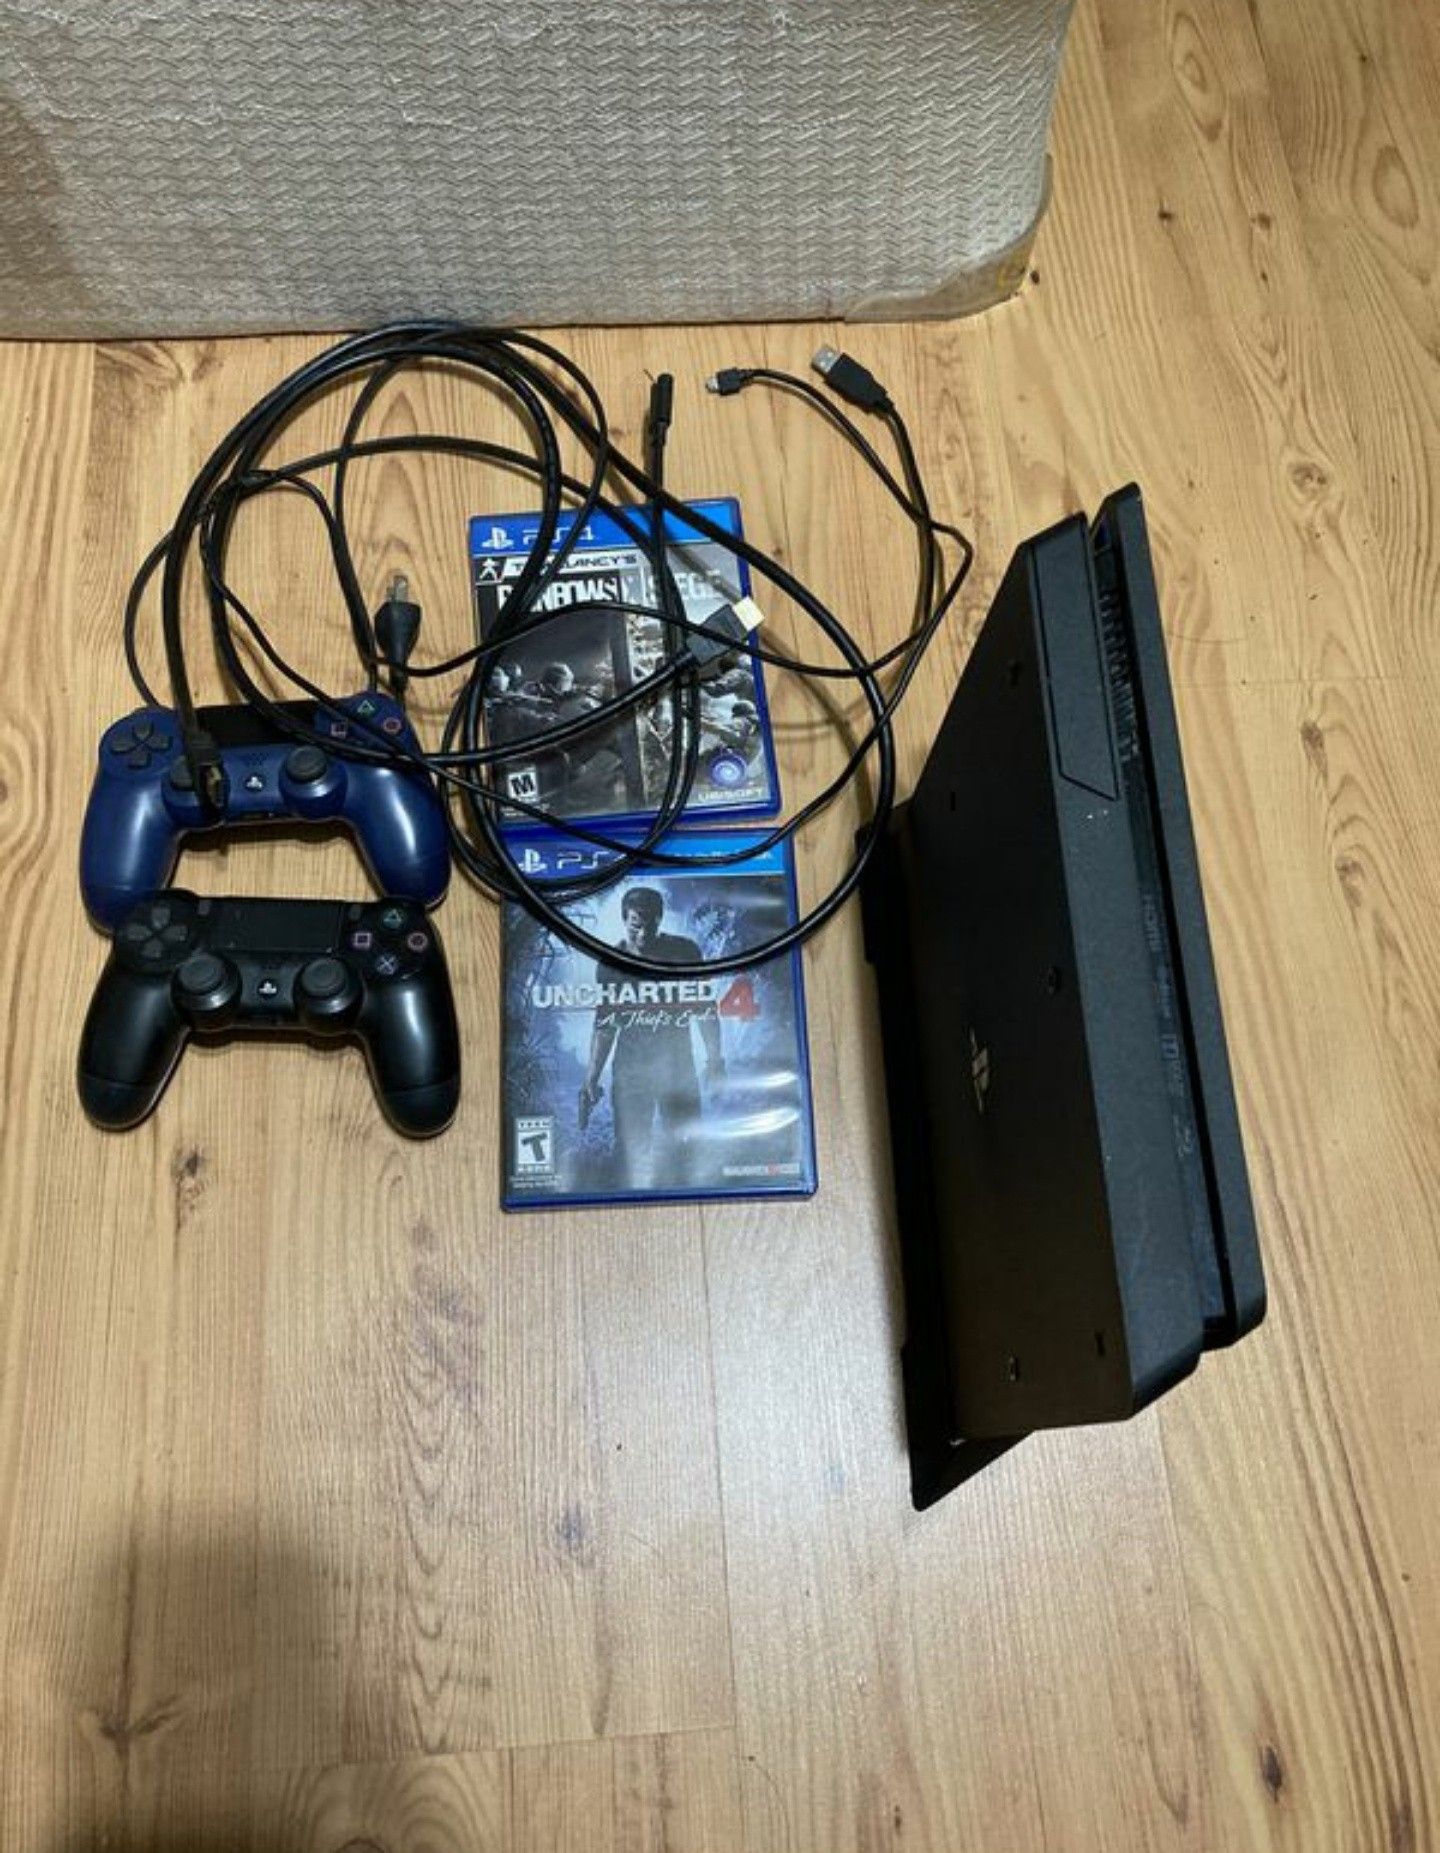 PS4 Slim with 2 controllers!!! And 2 games